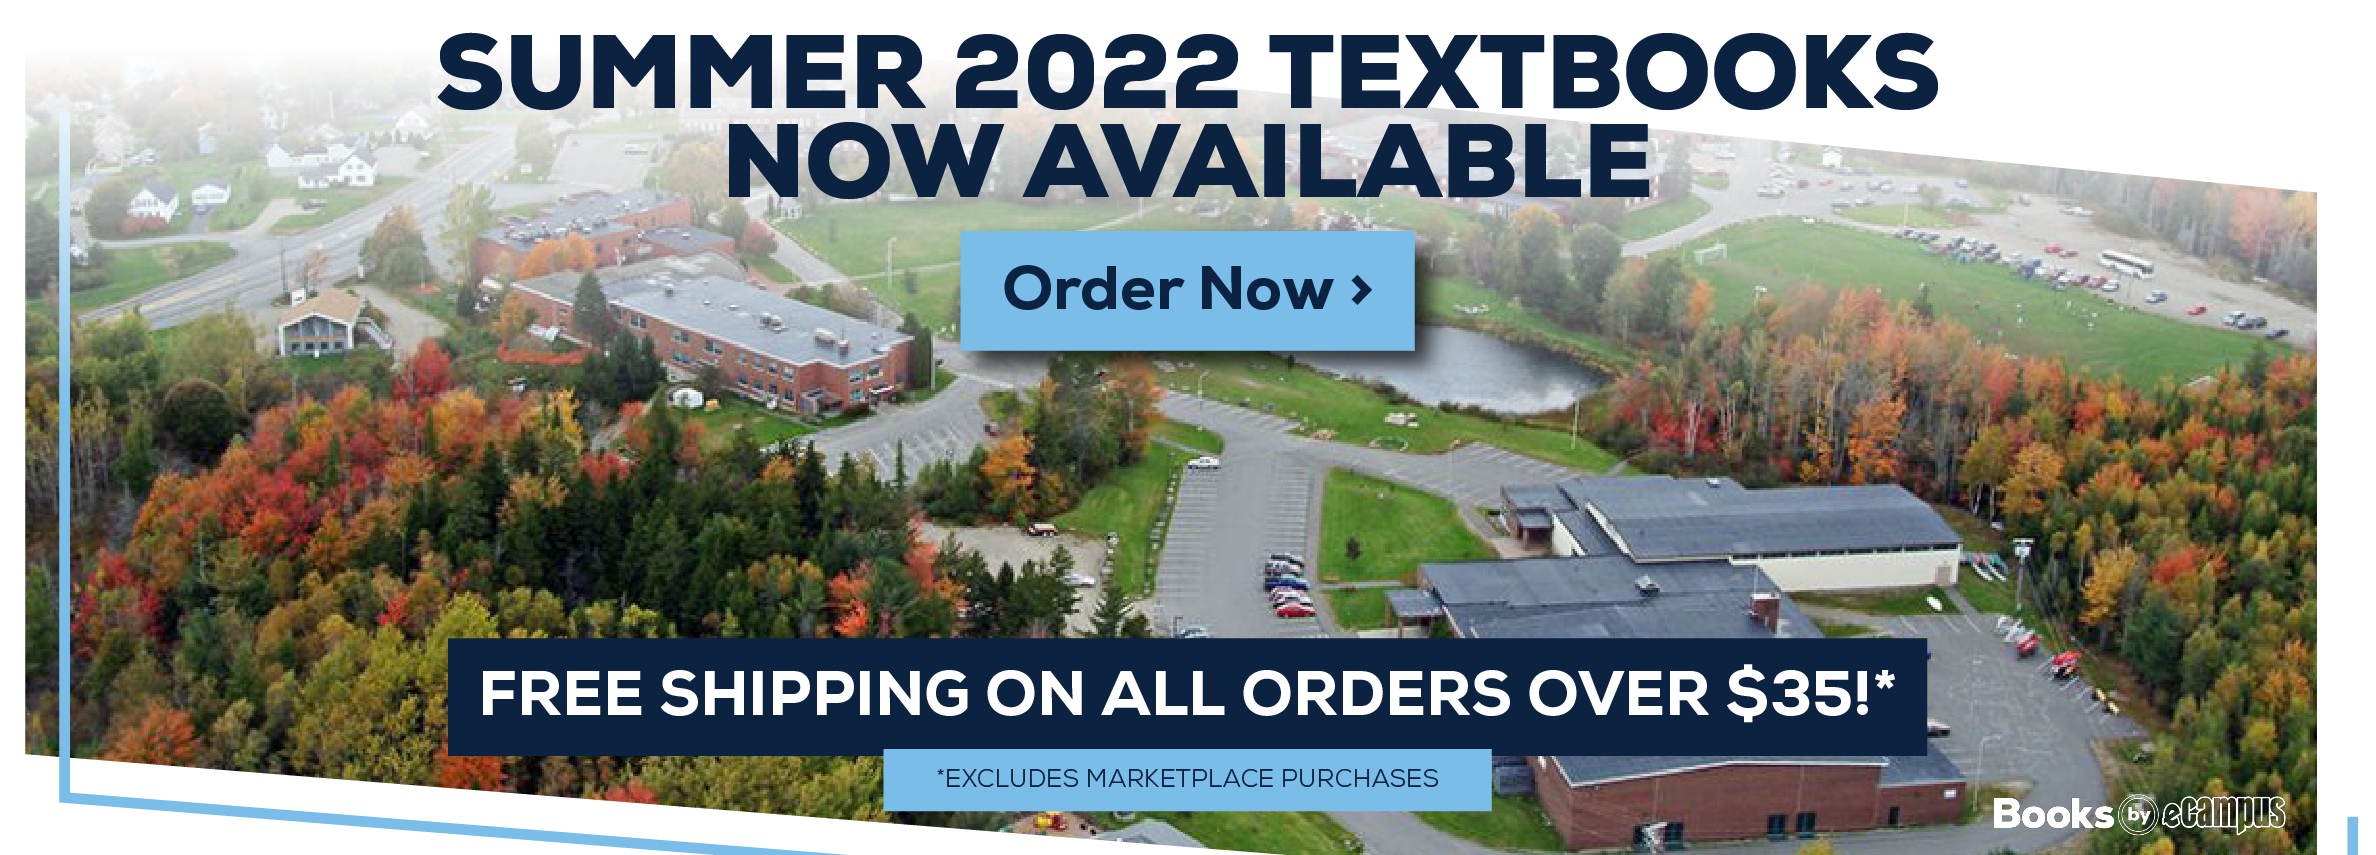 Summer 2022 Textbooks Now available. Order Now. Free shipping on all orders over $35